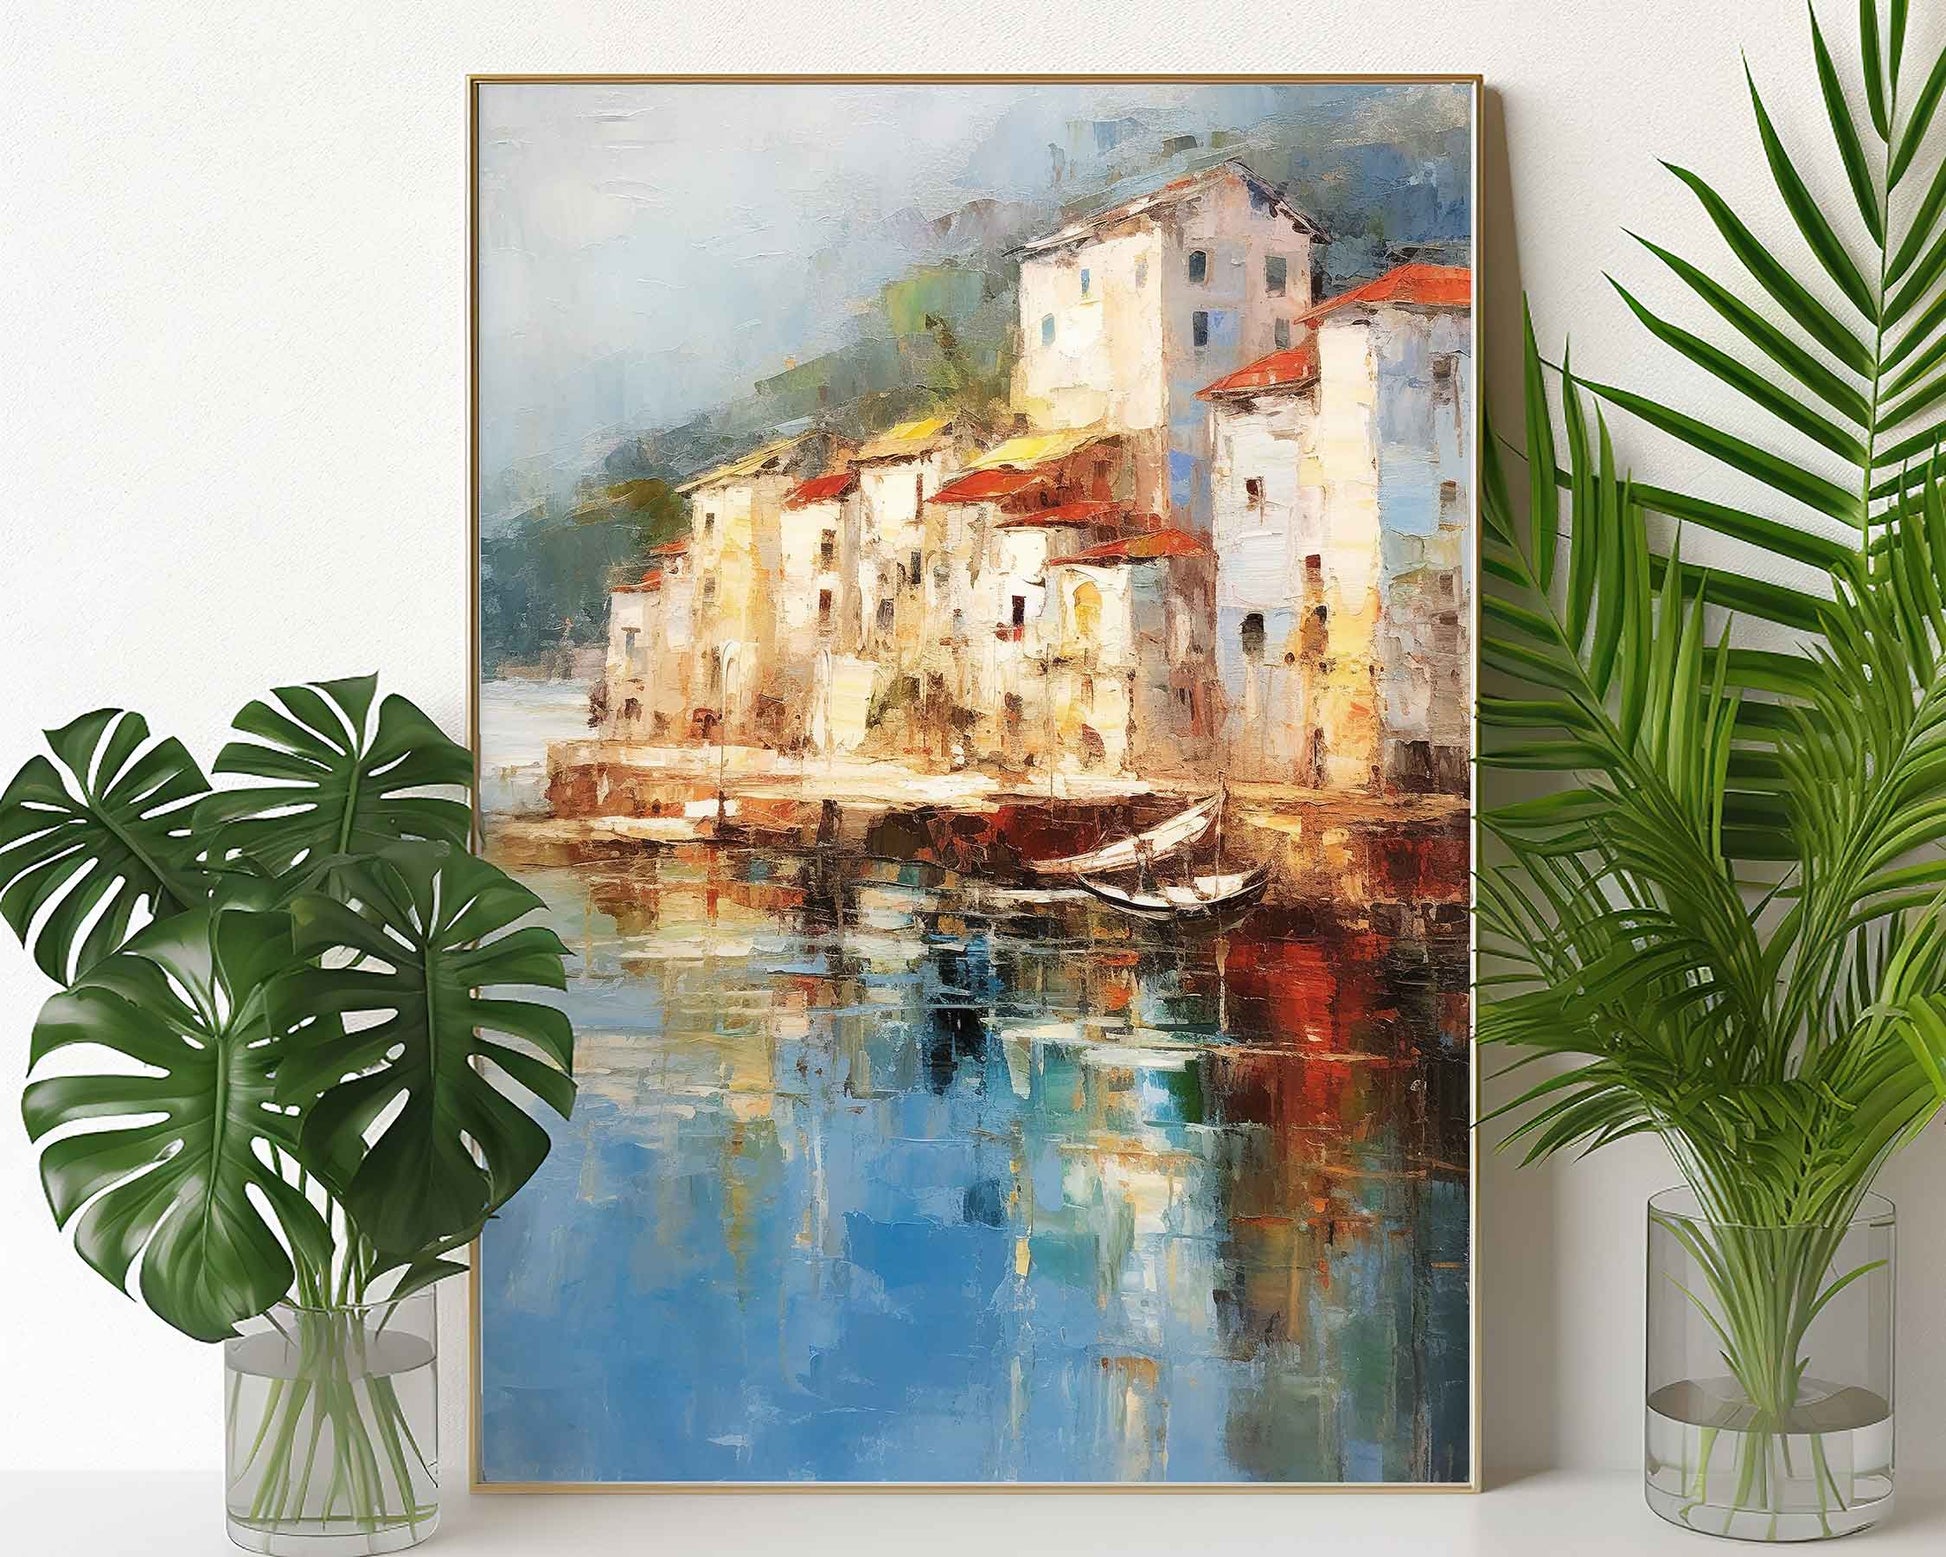 Framed Image of Italian Scenic Travel Landscapes & Lifestyle Wall Art Prints of Italy